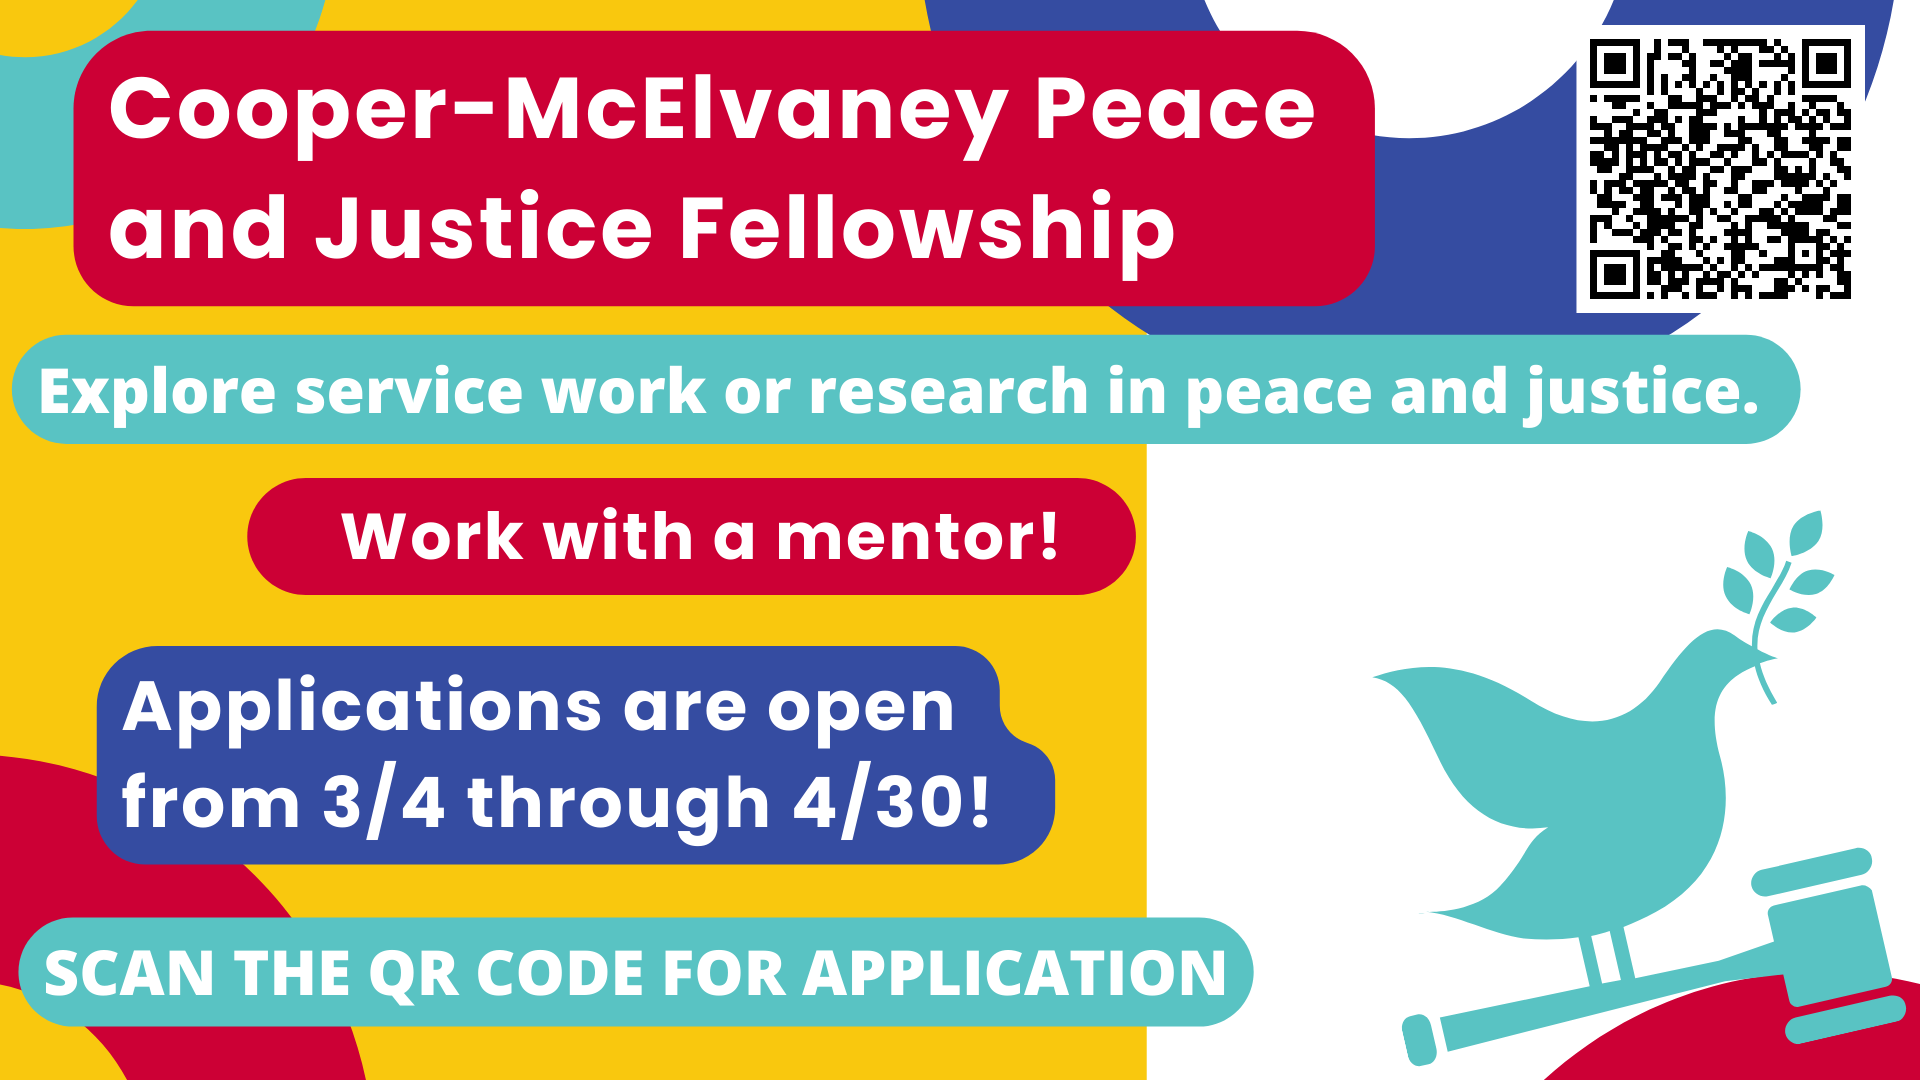 Cooper-McElvaney Peace and Justice Fellowship, Explore service work or research in peace and justice, Work with a mentor